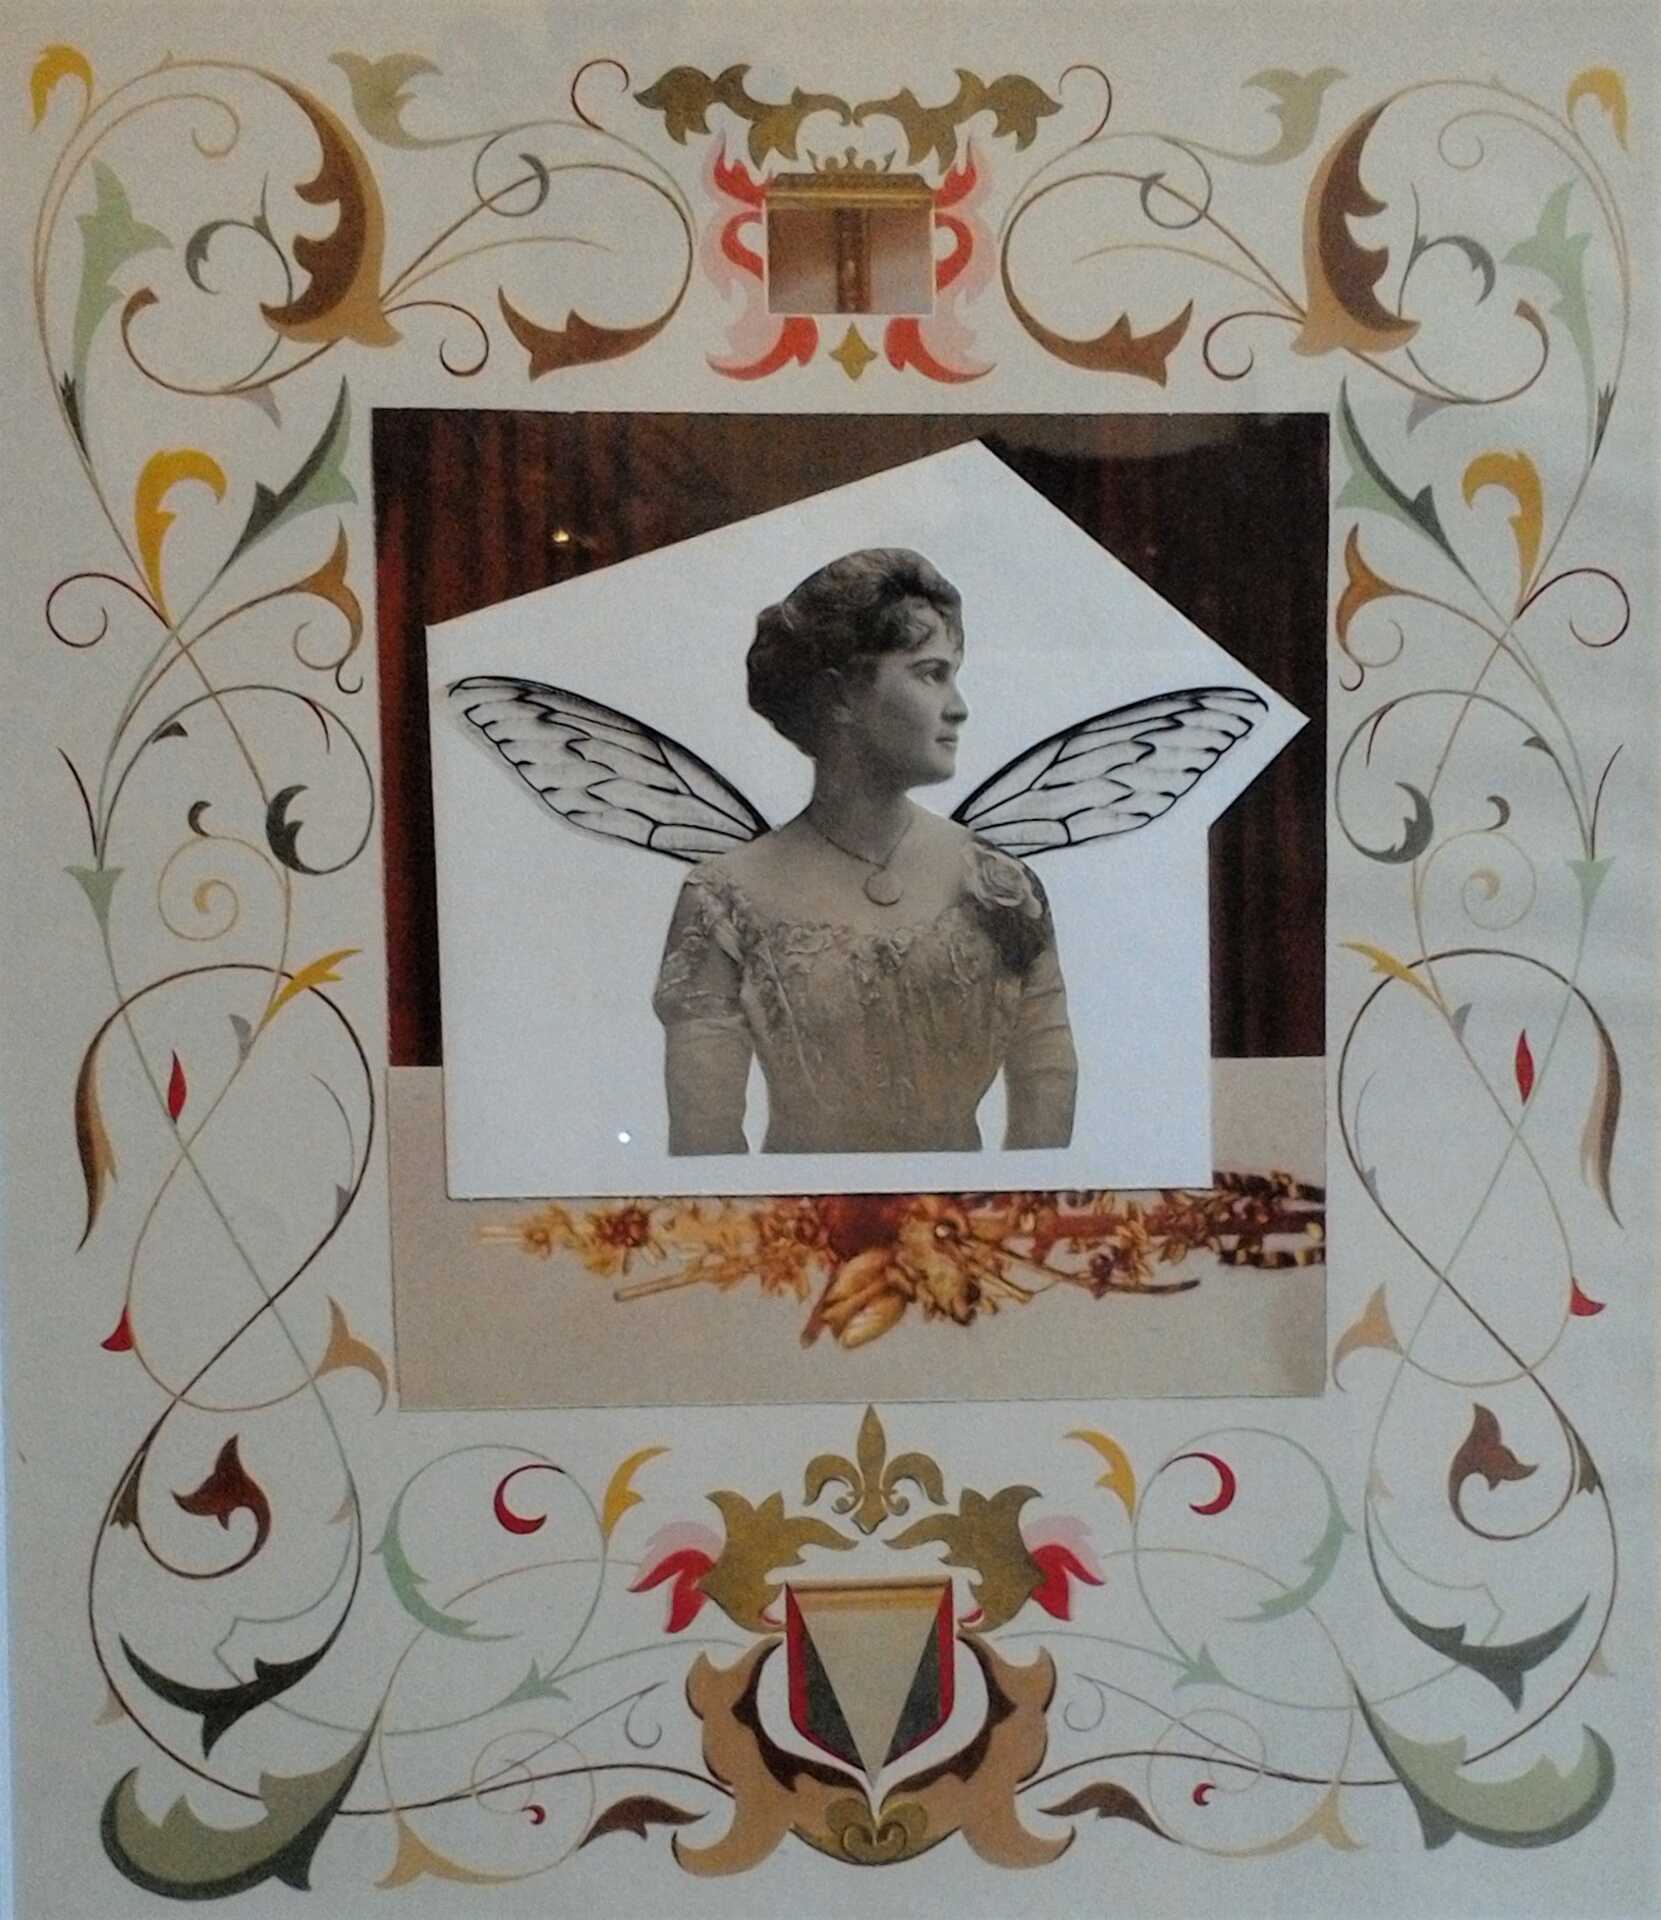 Collage work "Hilda" by Libby Bloxham. An elaborate ornamental border of swirling leaves and heraldric elements frames a square photograph of some kind of floral ornament. layered over the photograph is a vintage B&W photo of a woman early 1900s dress, standing square on to the viewer while looking off to her left side. From her back sprout insect-like wings cut from acetate film.